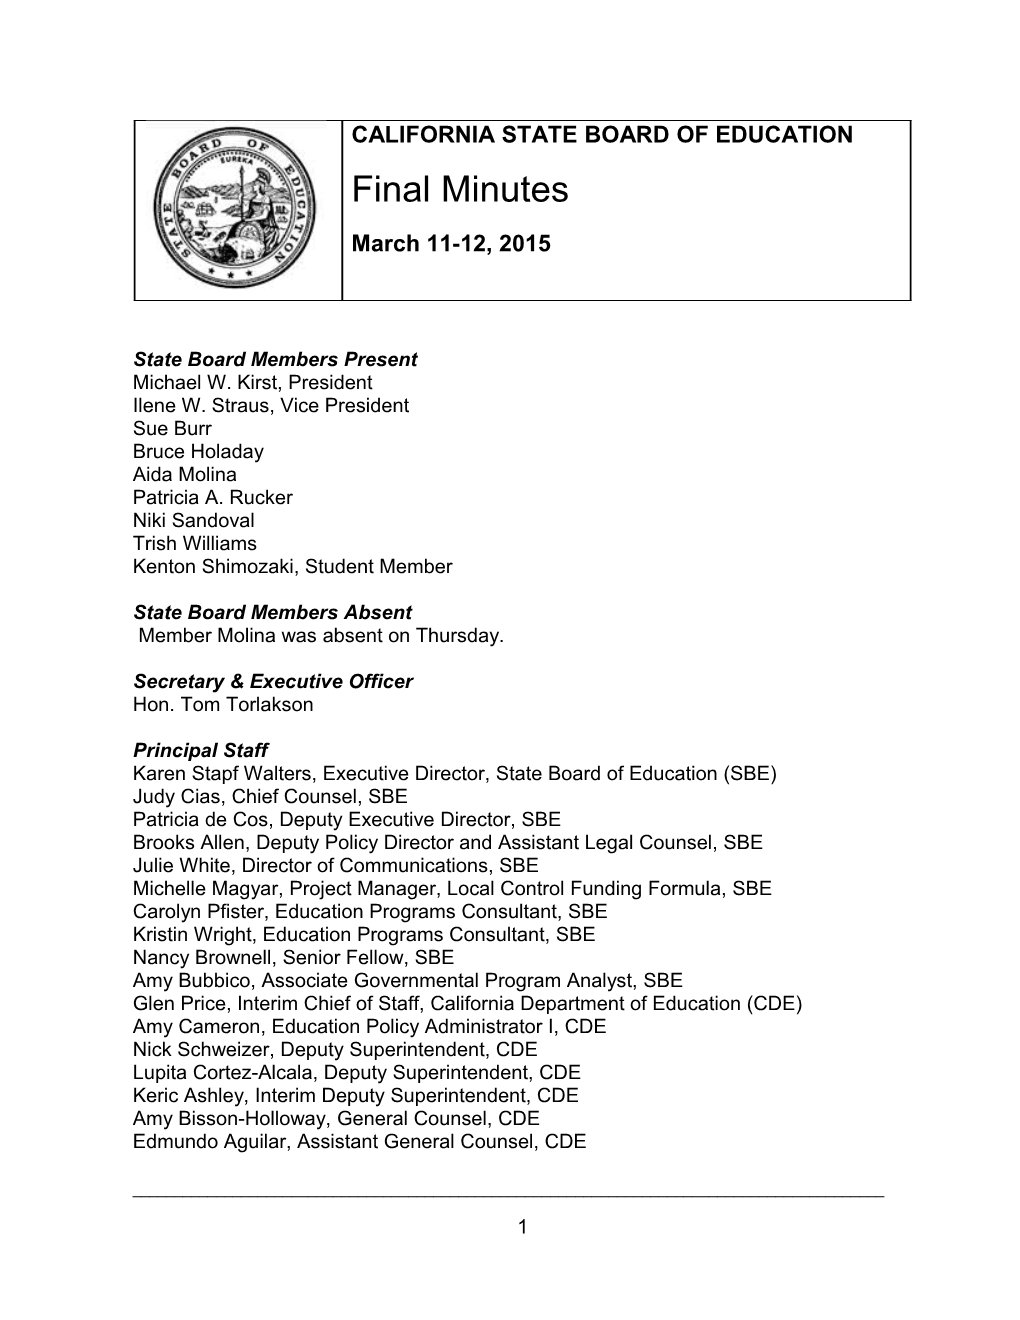 Final Minutes for March 2015 - SBE Minutes (CA State Board of Education)